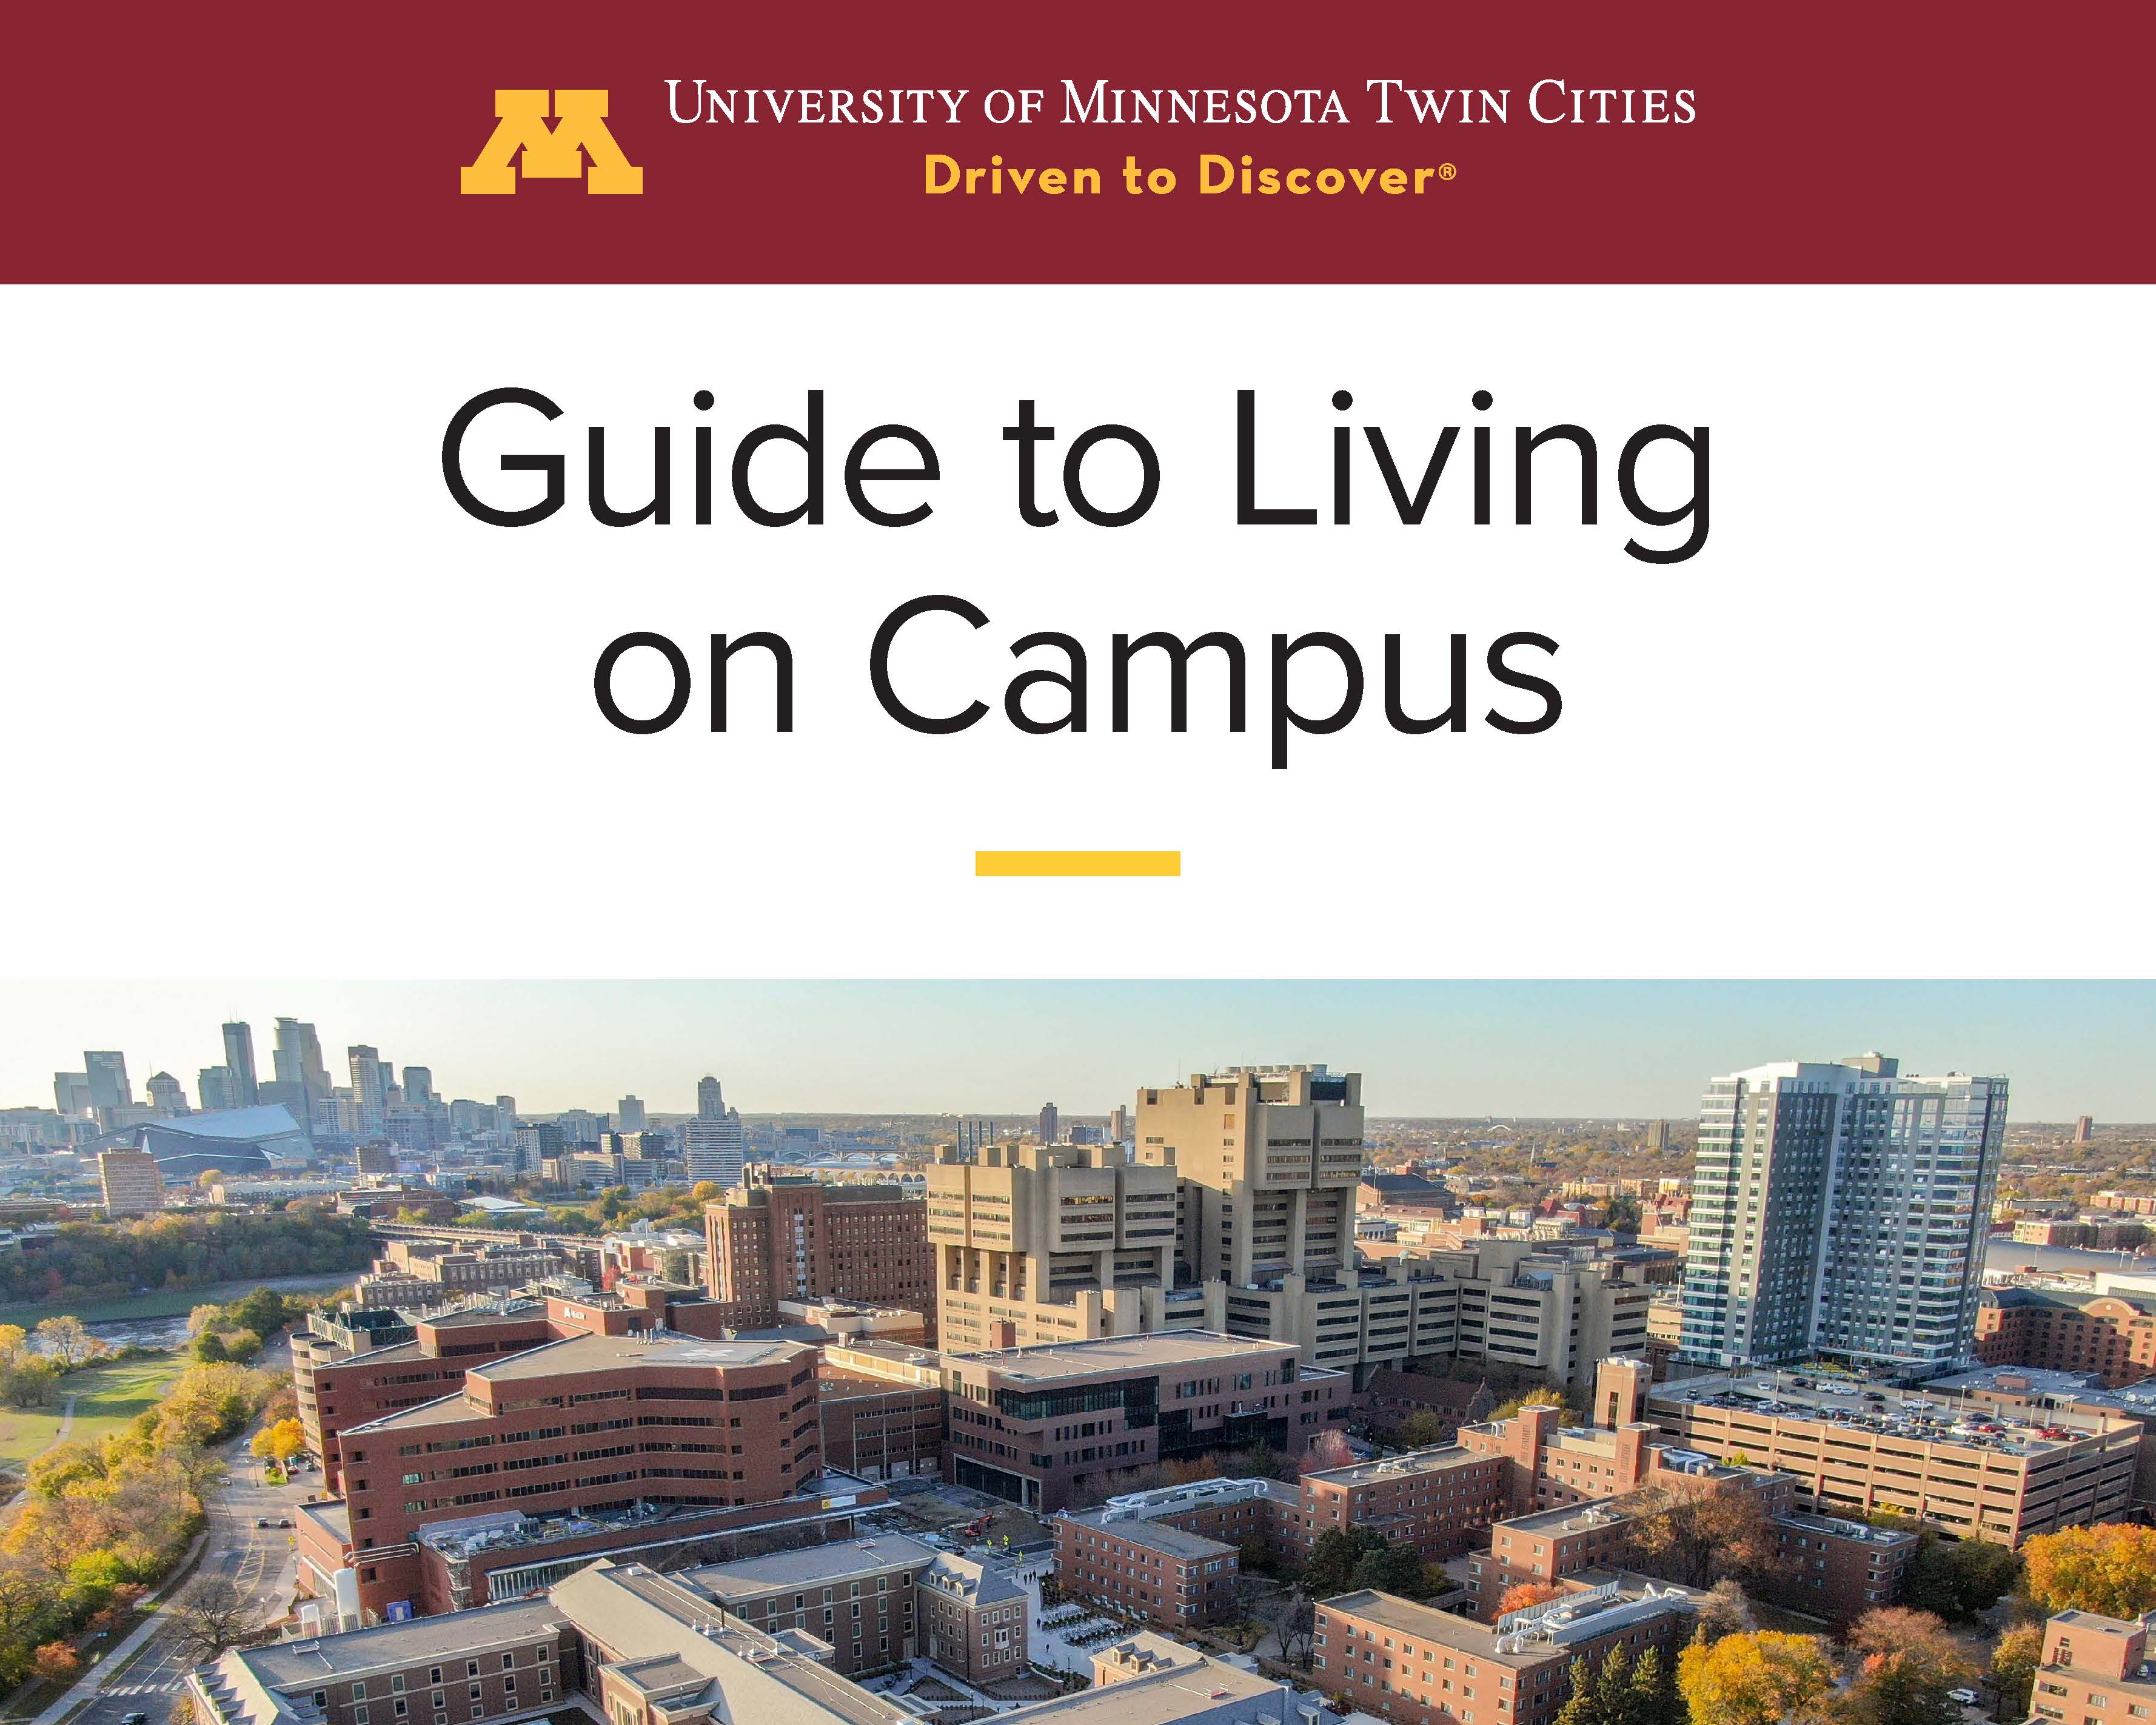 Guide to Living on Campus | University of Minnesota Twin Cities